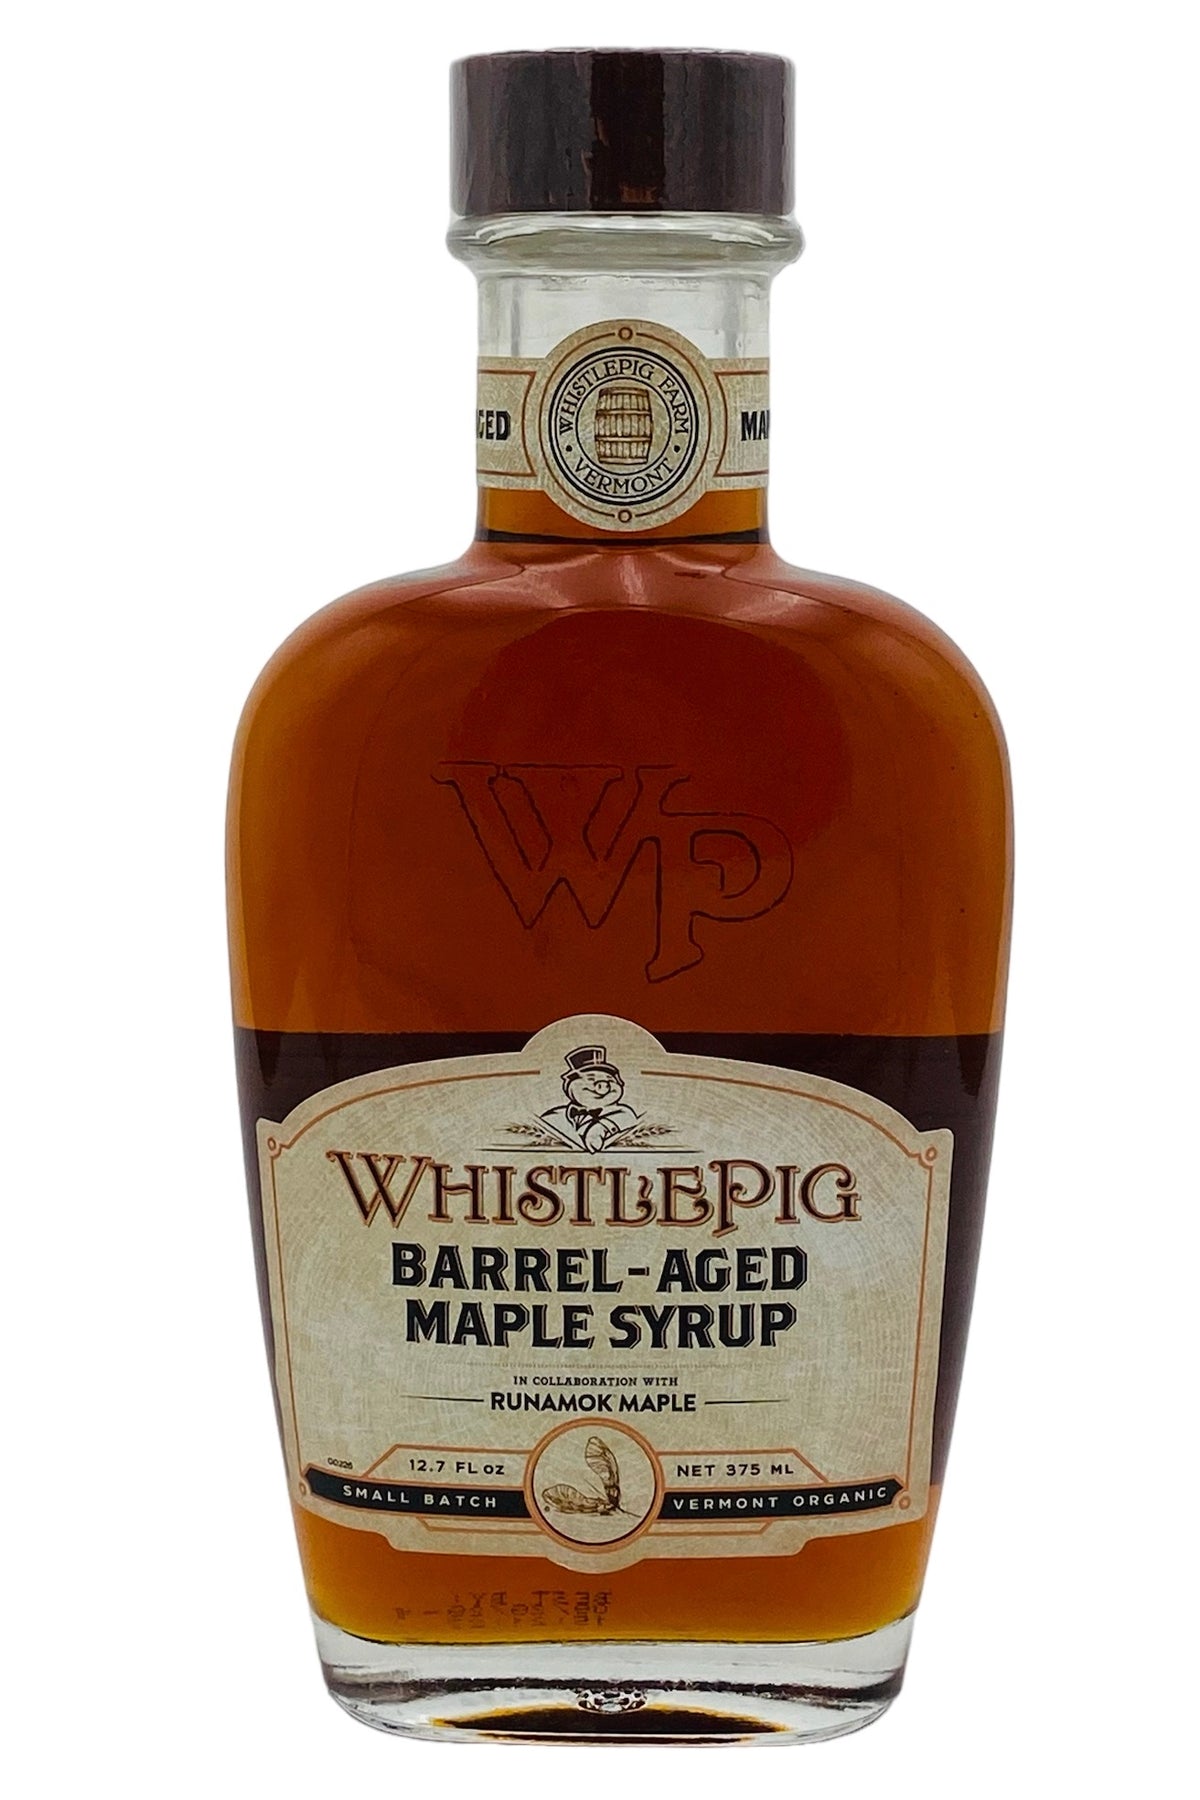 WhistlePig Barrel-Aged Maple Syrup 375 ml